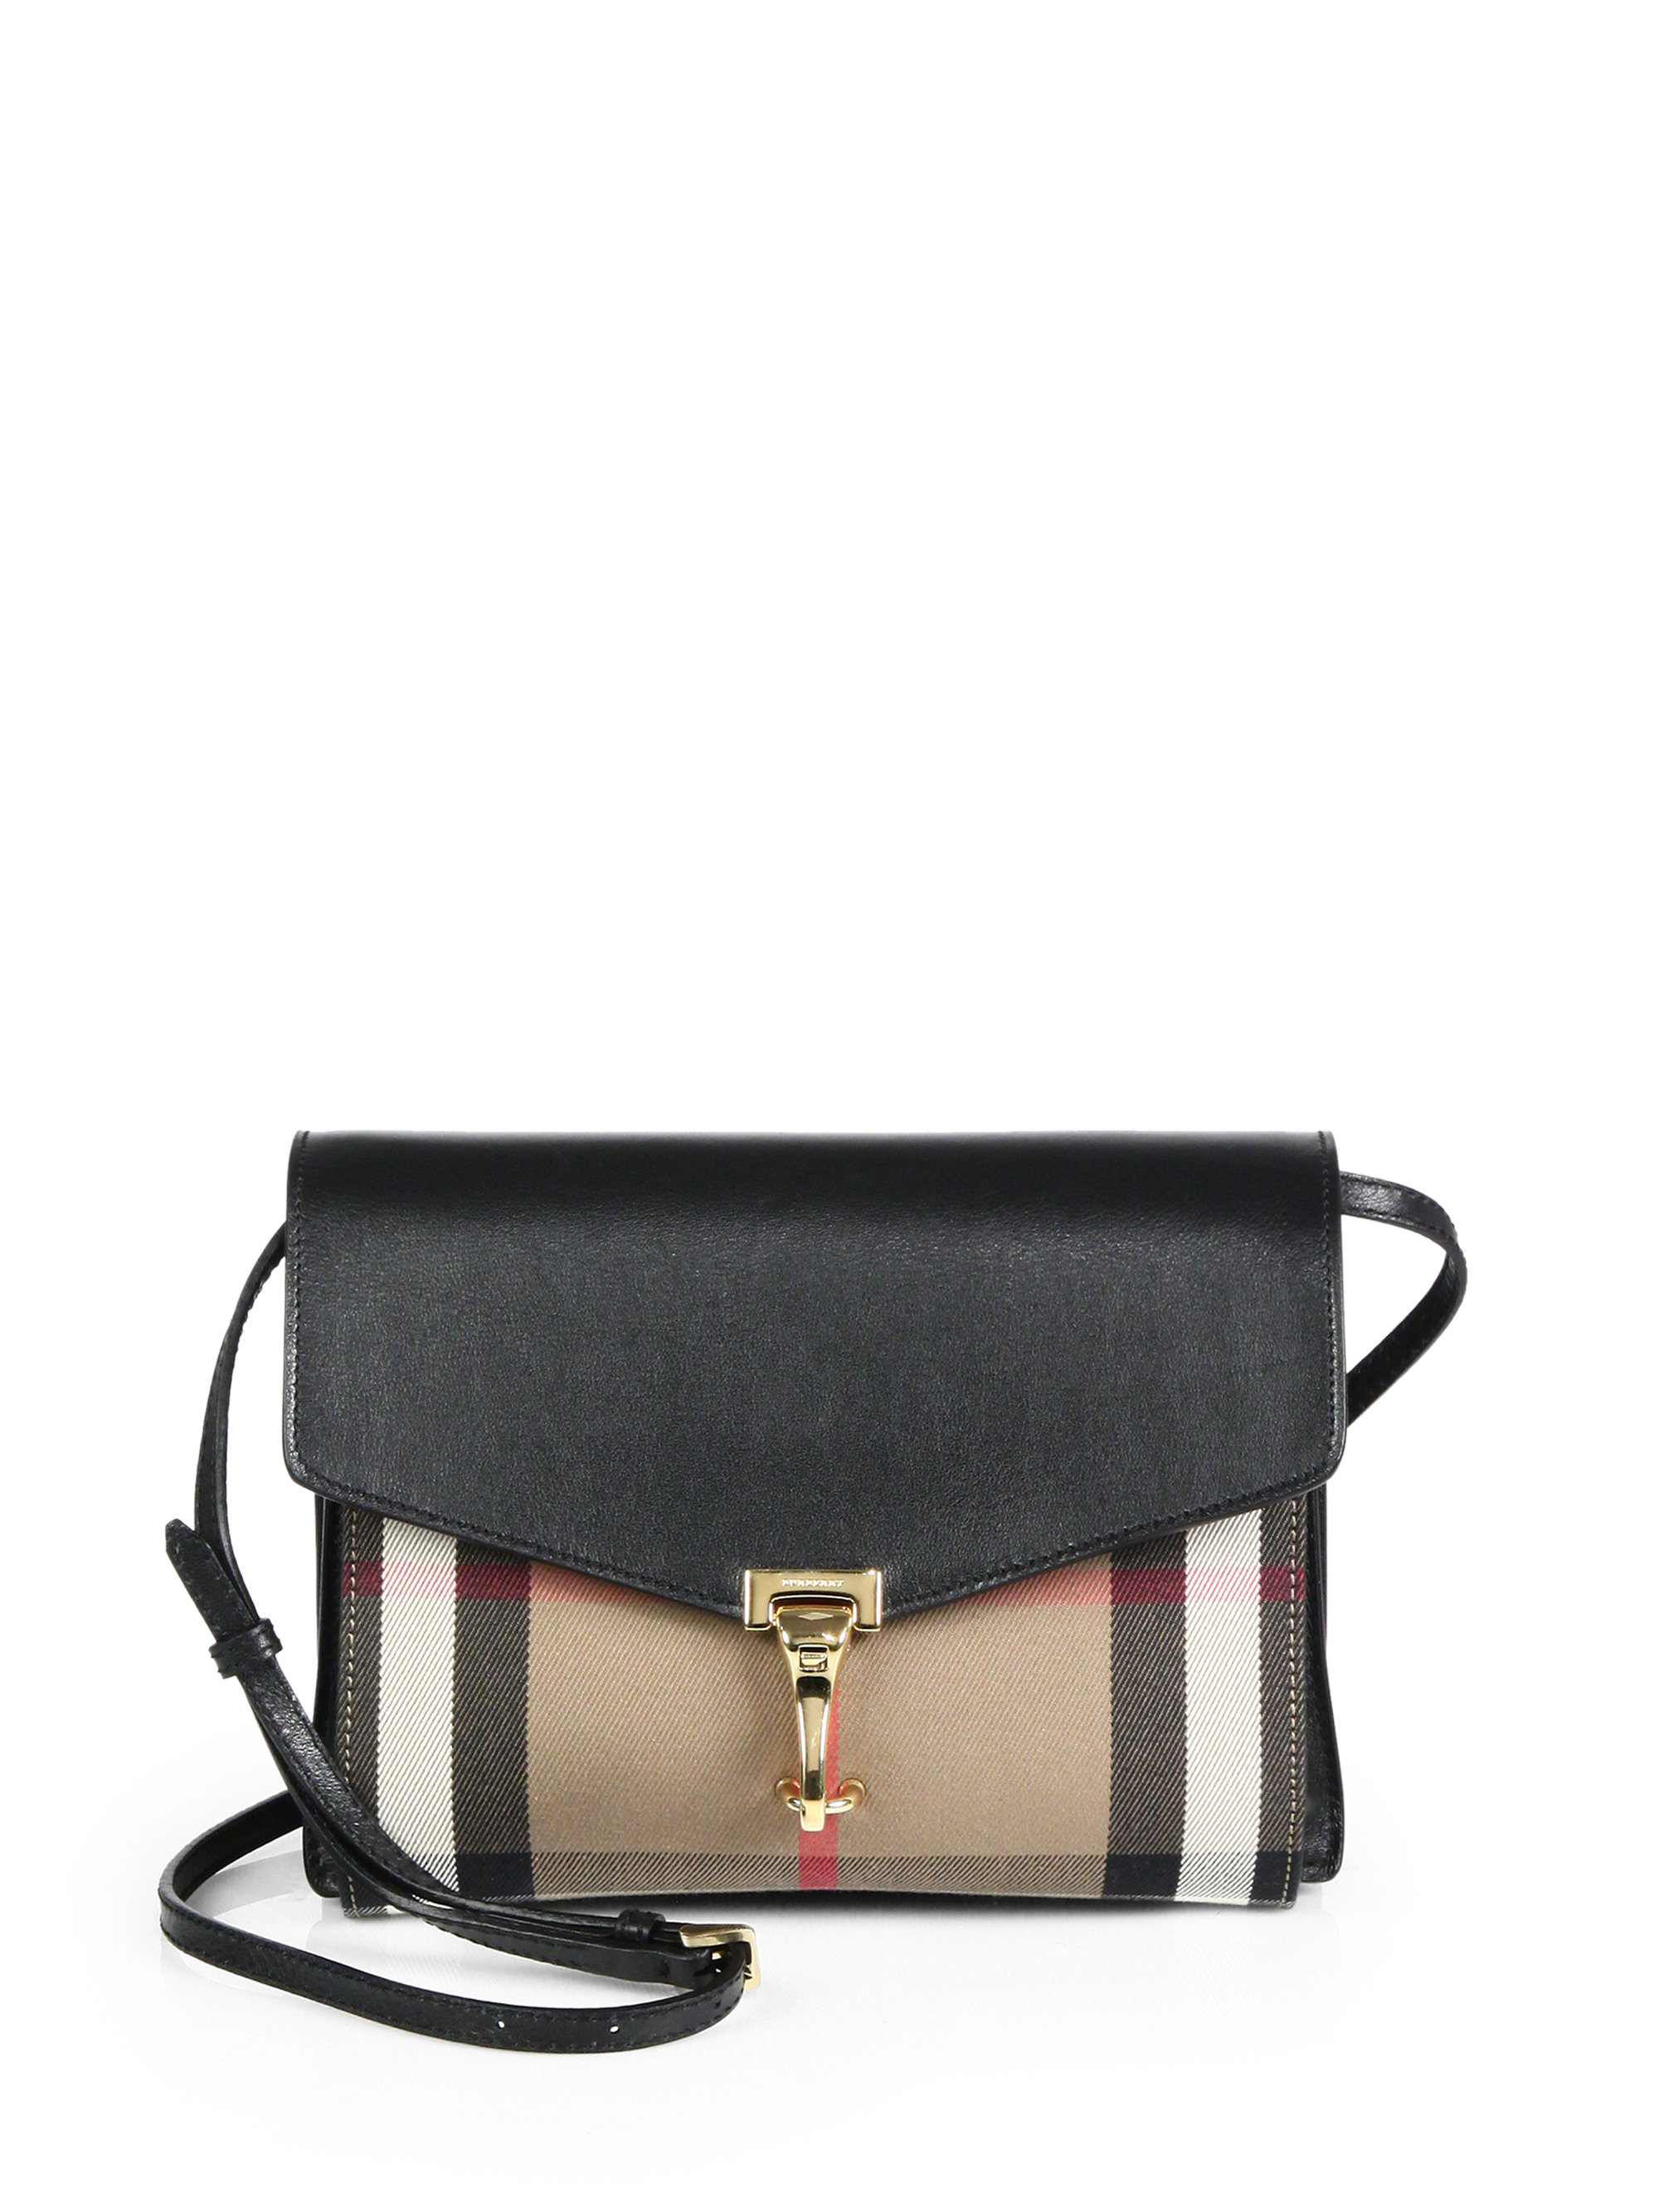 Lyst - Burberry Macken Small House Check & Leather Crossbody Bag in Black